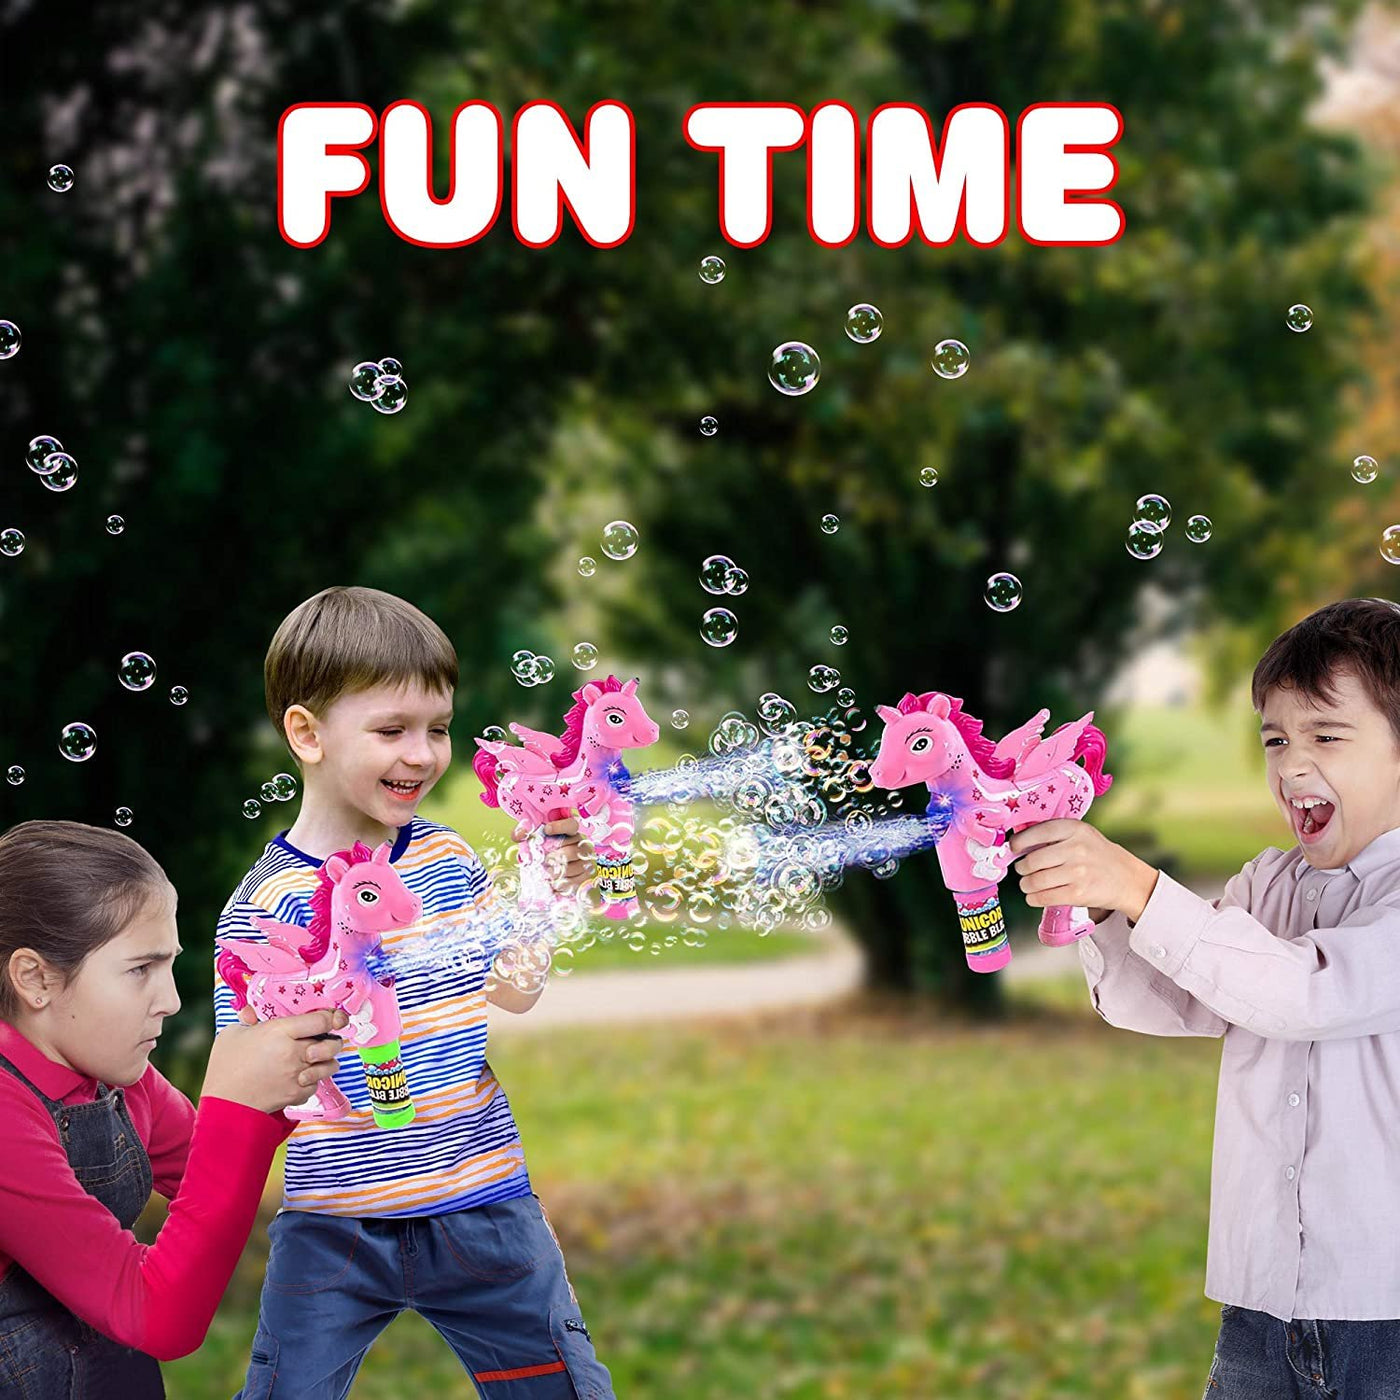  Bubble Gun with 69-Hole and Light, Summer Indoor